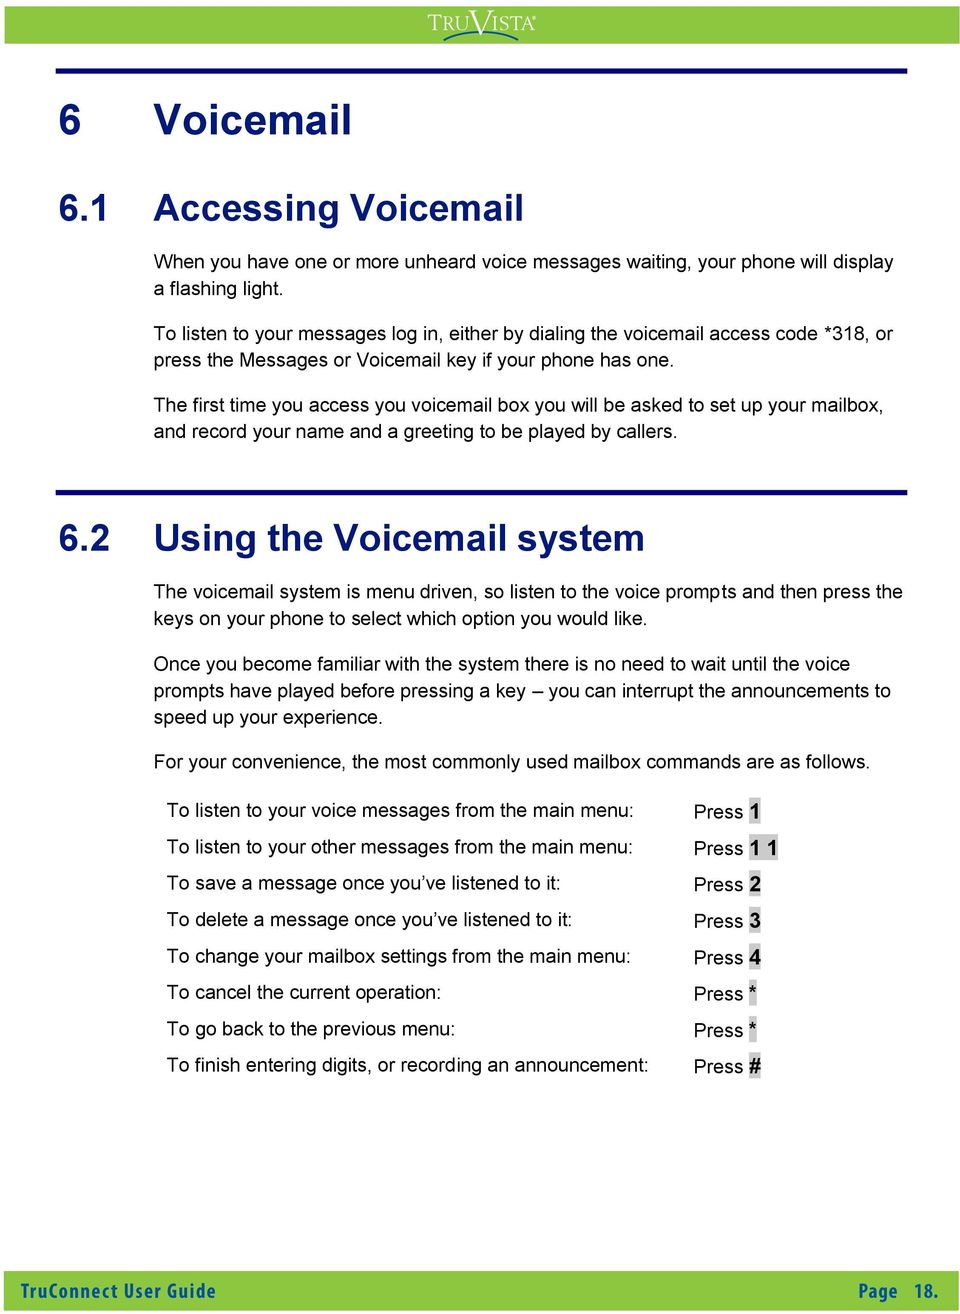 The first time you access you voicemail box you will be asked to set up your mailbox, and record your name and a greeting to be played by callers. 6.